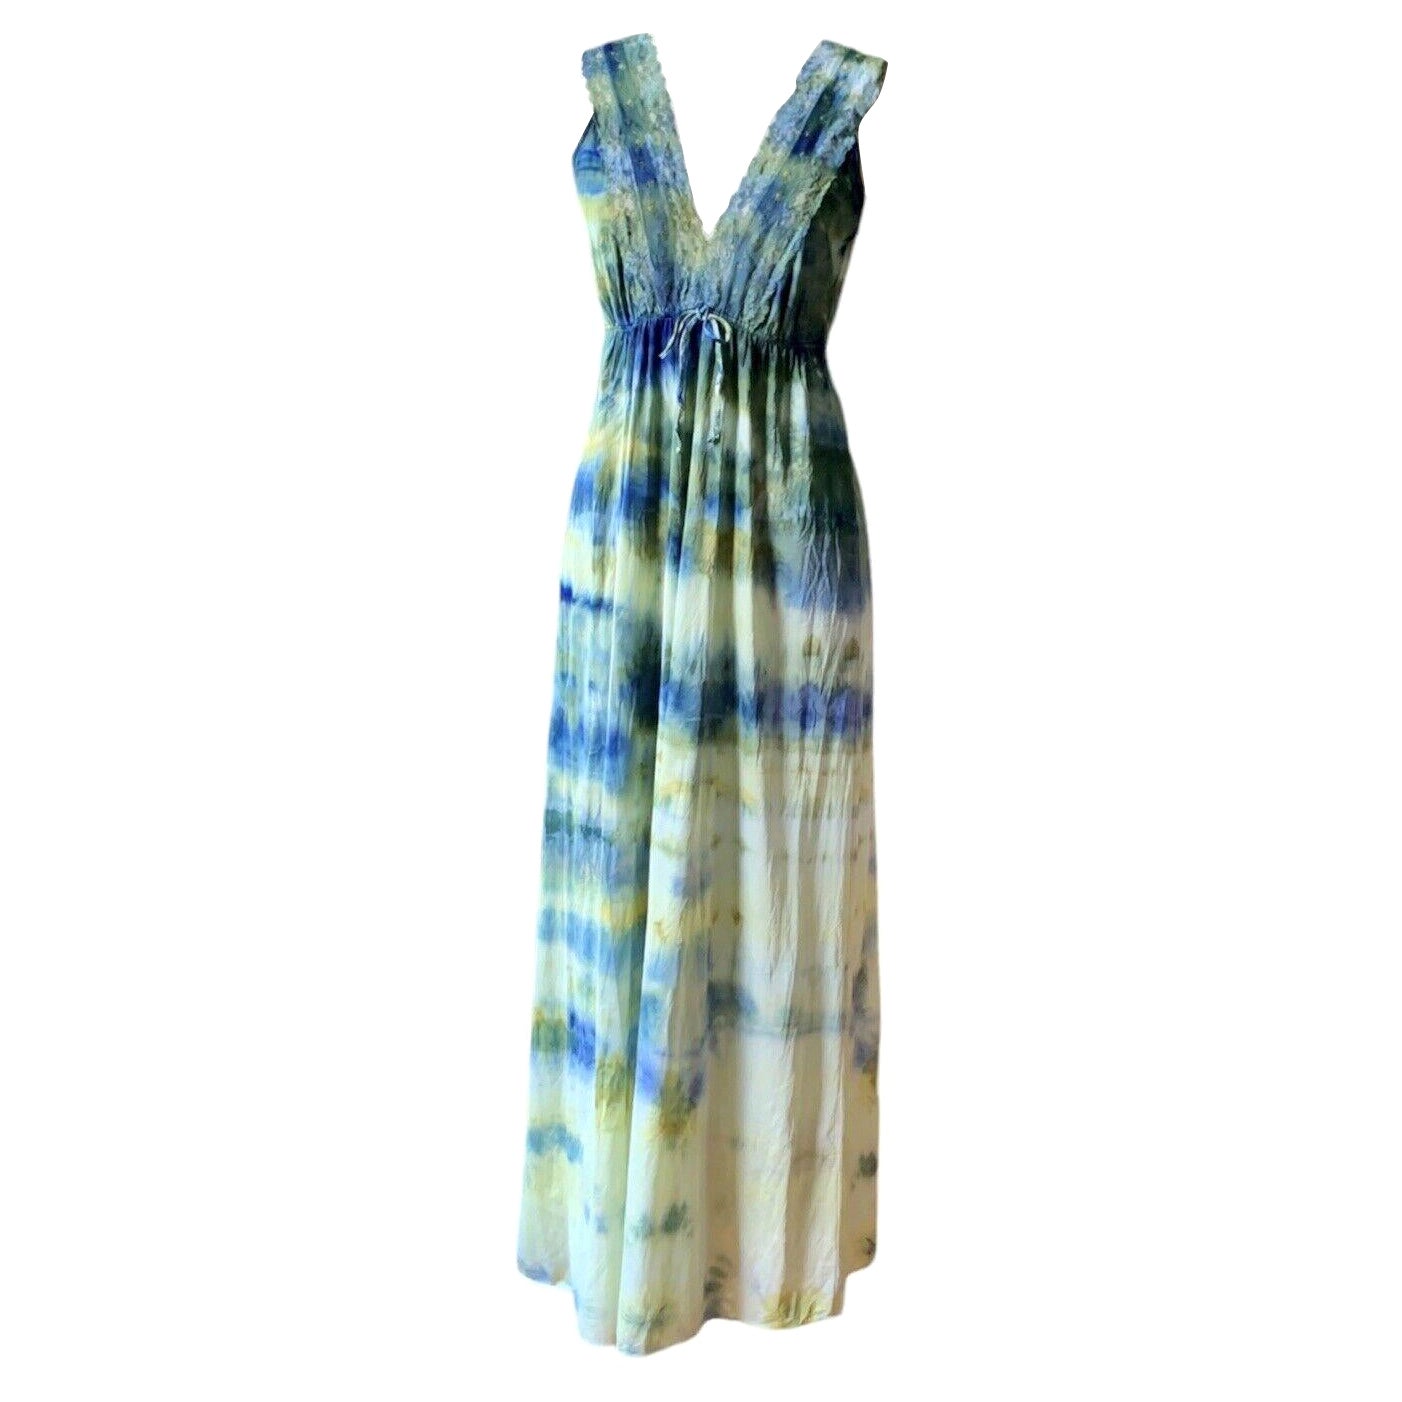 DYED PETALS Vintage Hand Botanically Dyed Tie-Dyed Slip Kleid S/M 36